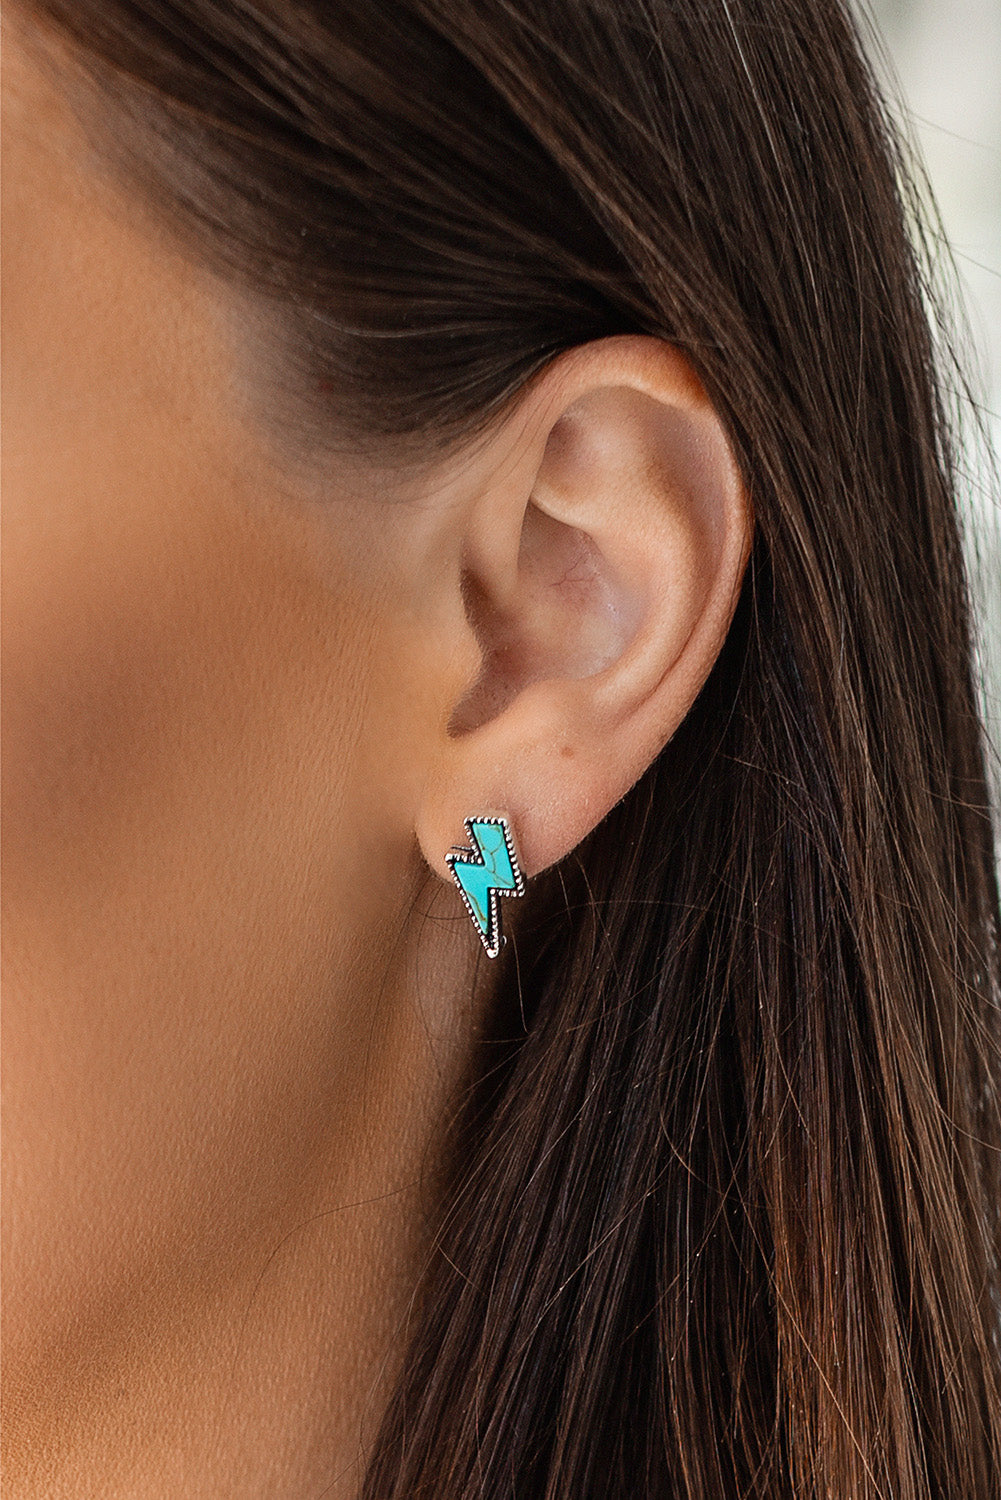 Green Three-piece Turquoise Stud Earrings Set - Dixie Hike & Style